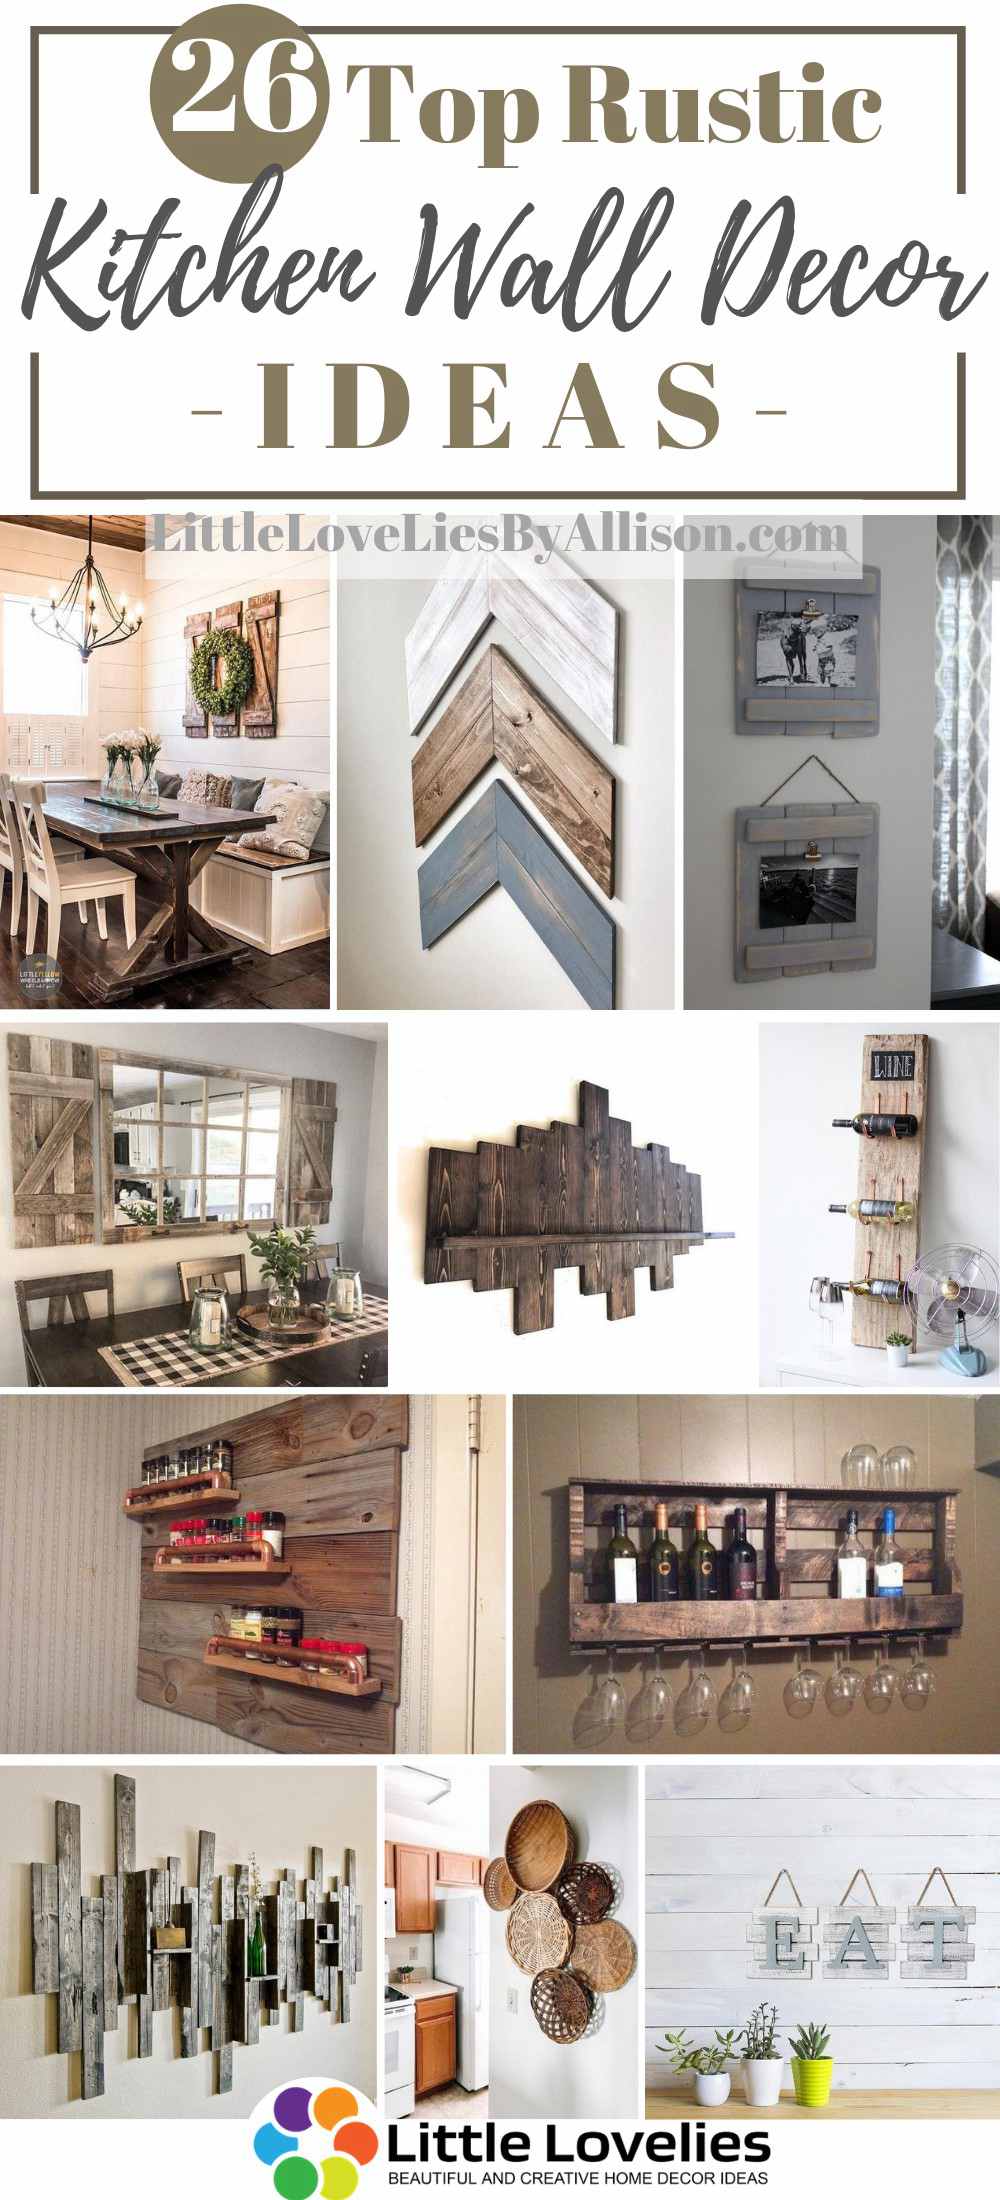 20 Top Rustic Kitchen Wall Decor Ideas That You Can Make in 20